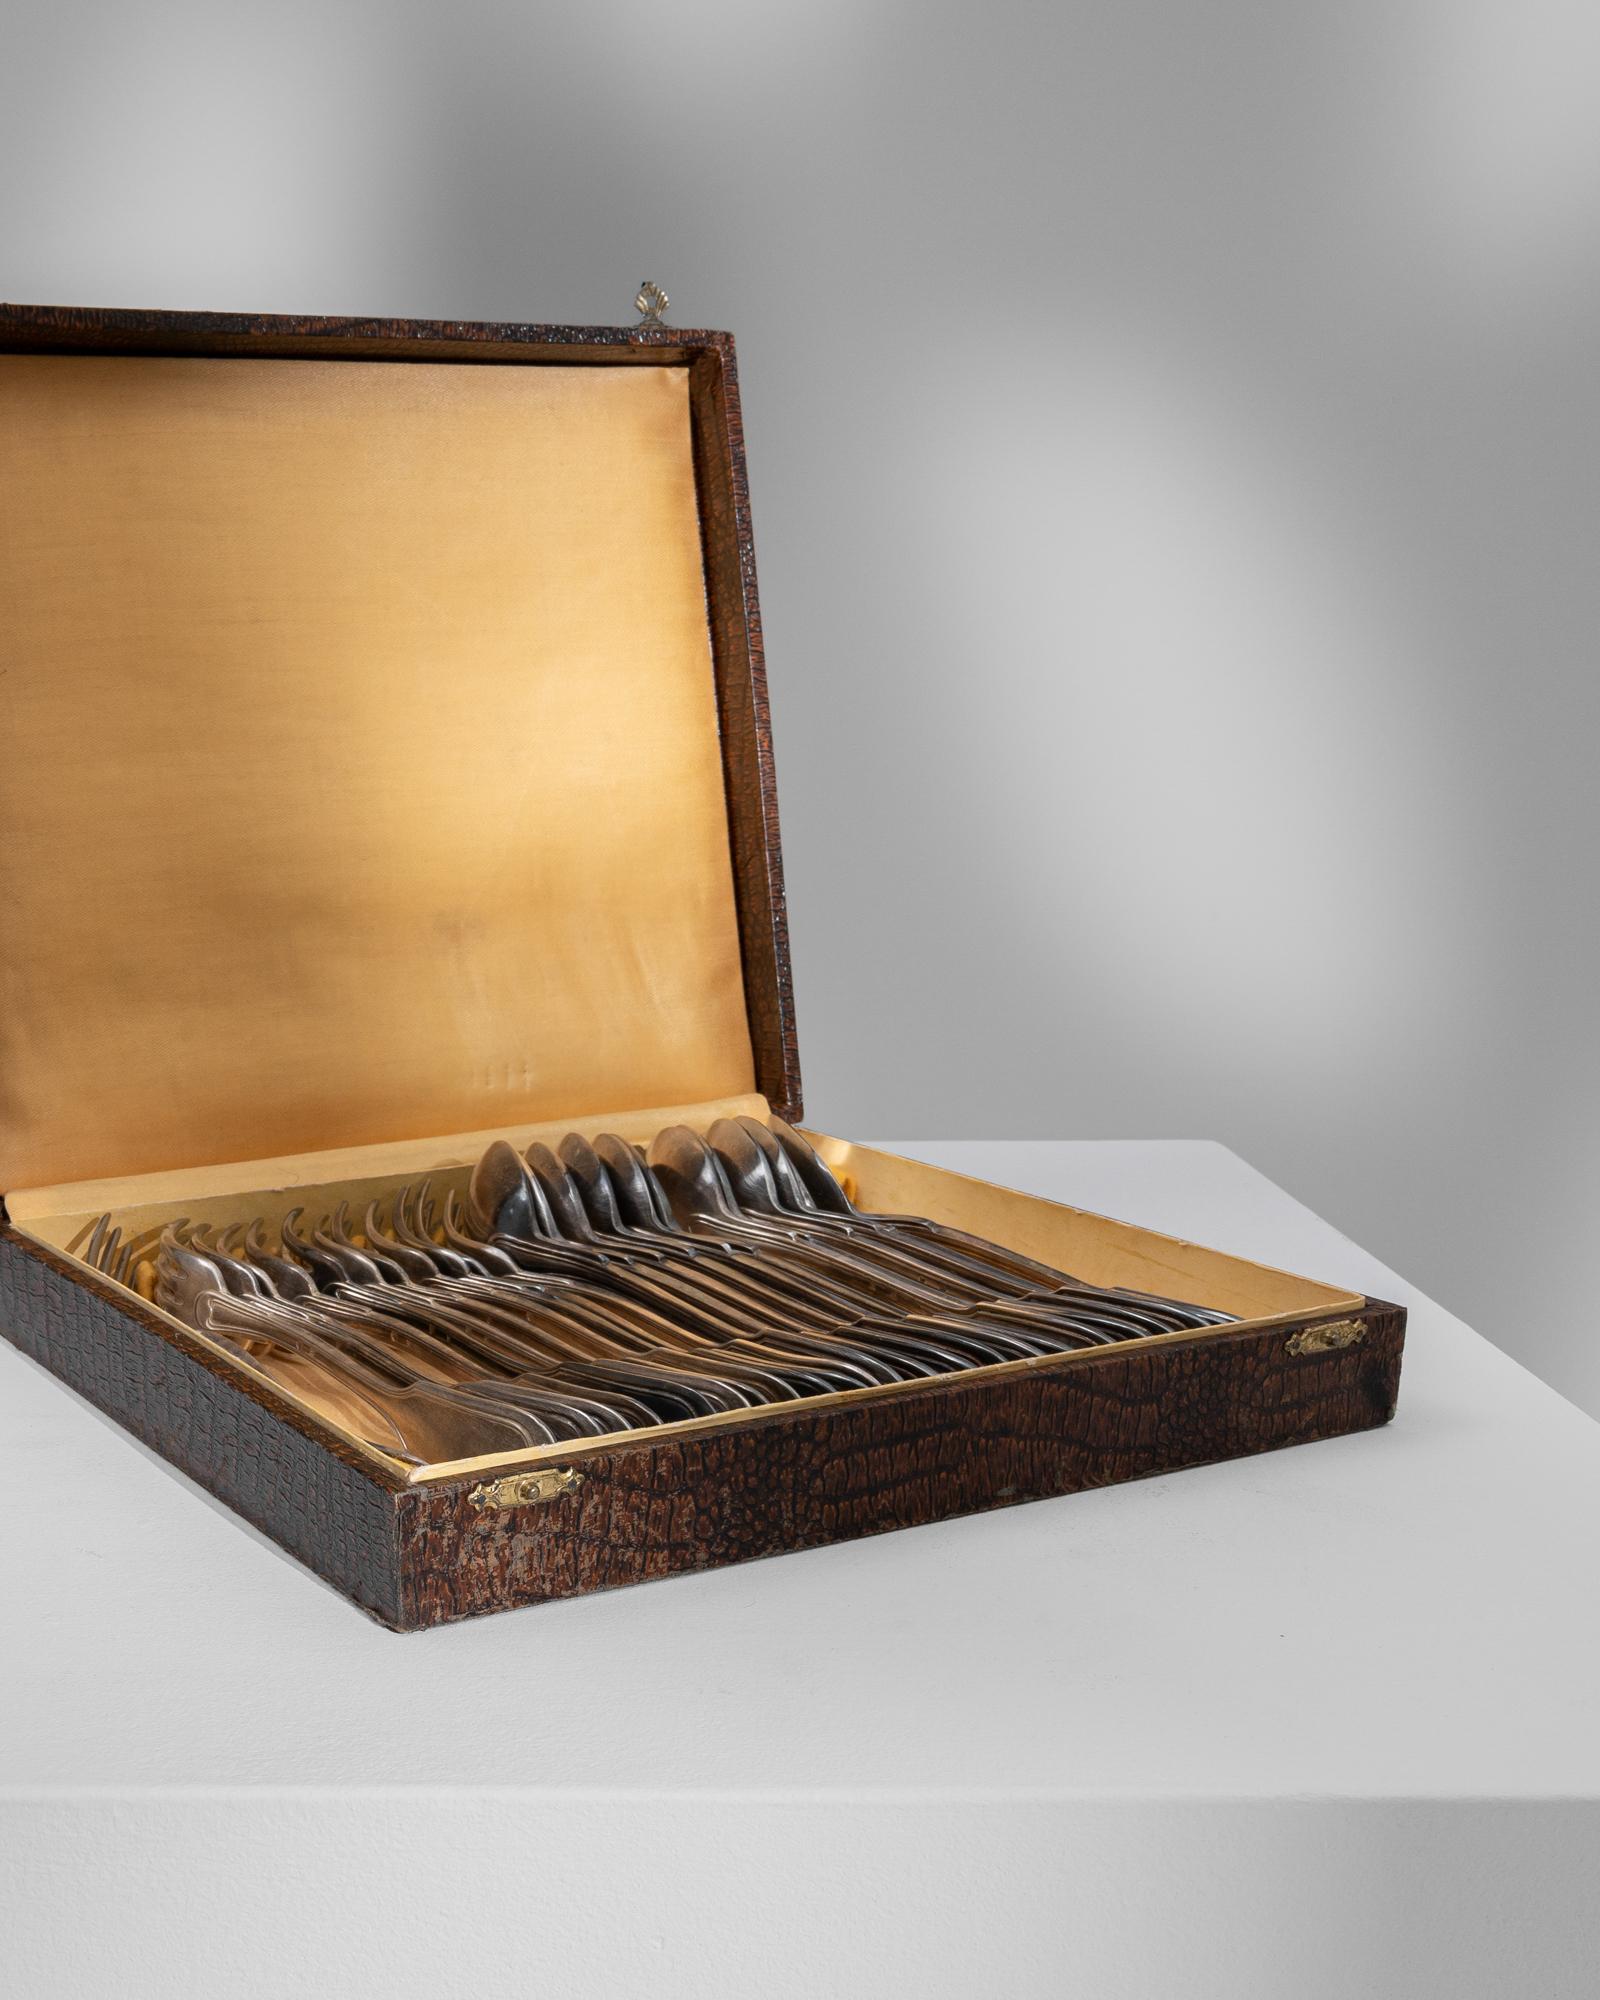 Early 20th Century French Set Of Spoons & Forks In Wooden Box 2